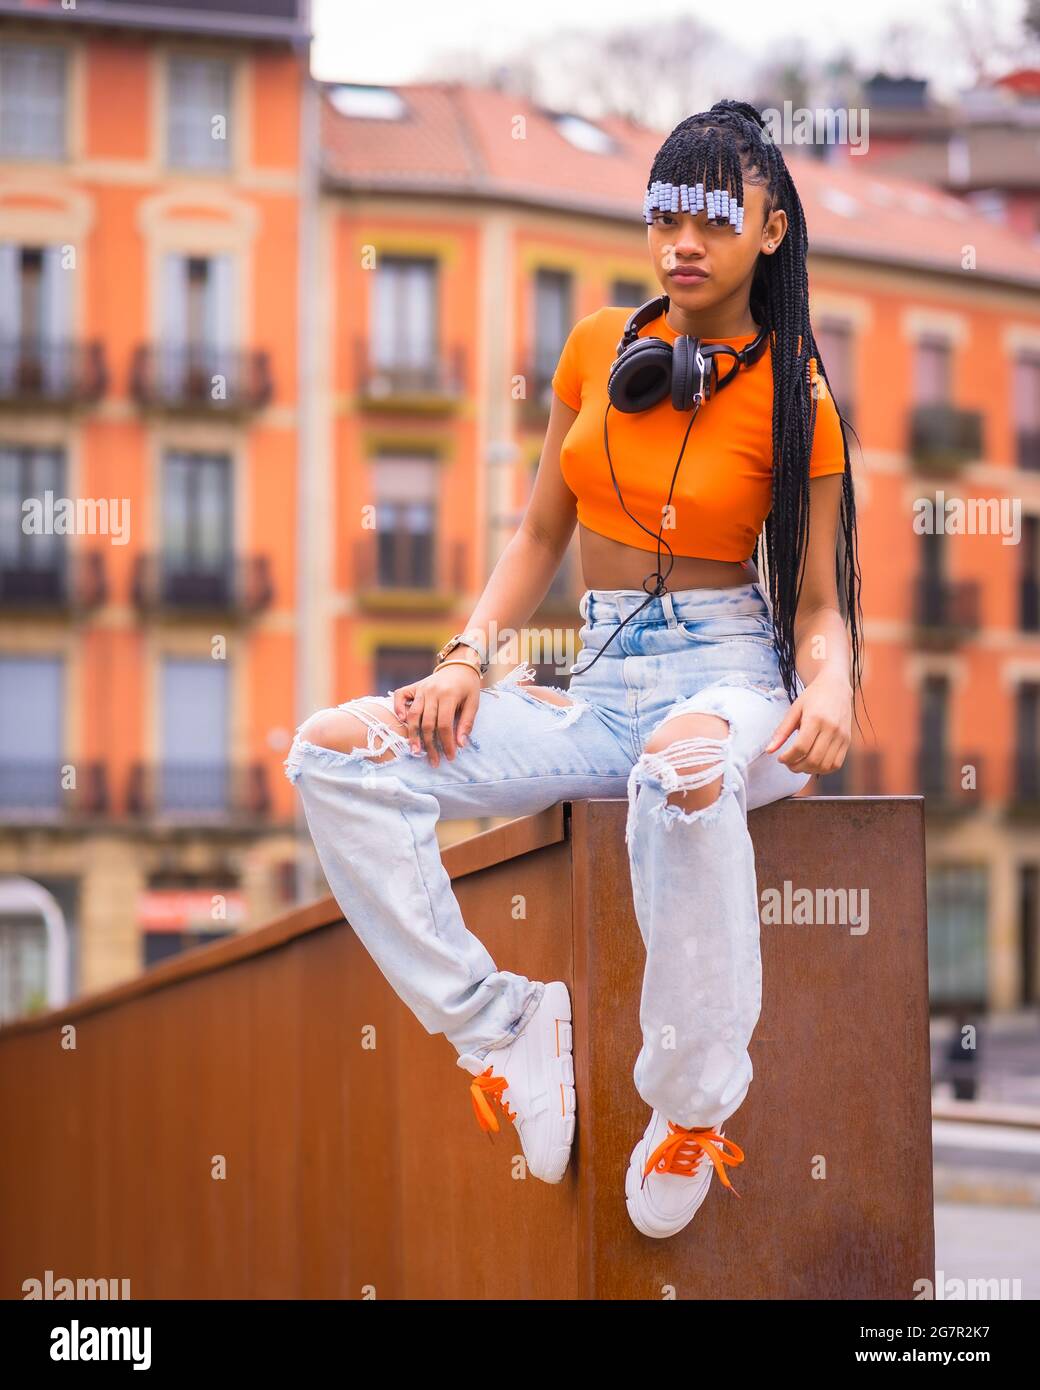 Native American trap dancer with braids wearing an orange shirt and cowboy pants sitting on the wall Stock Photo